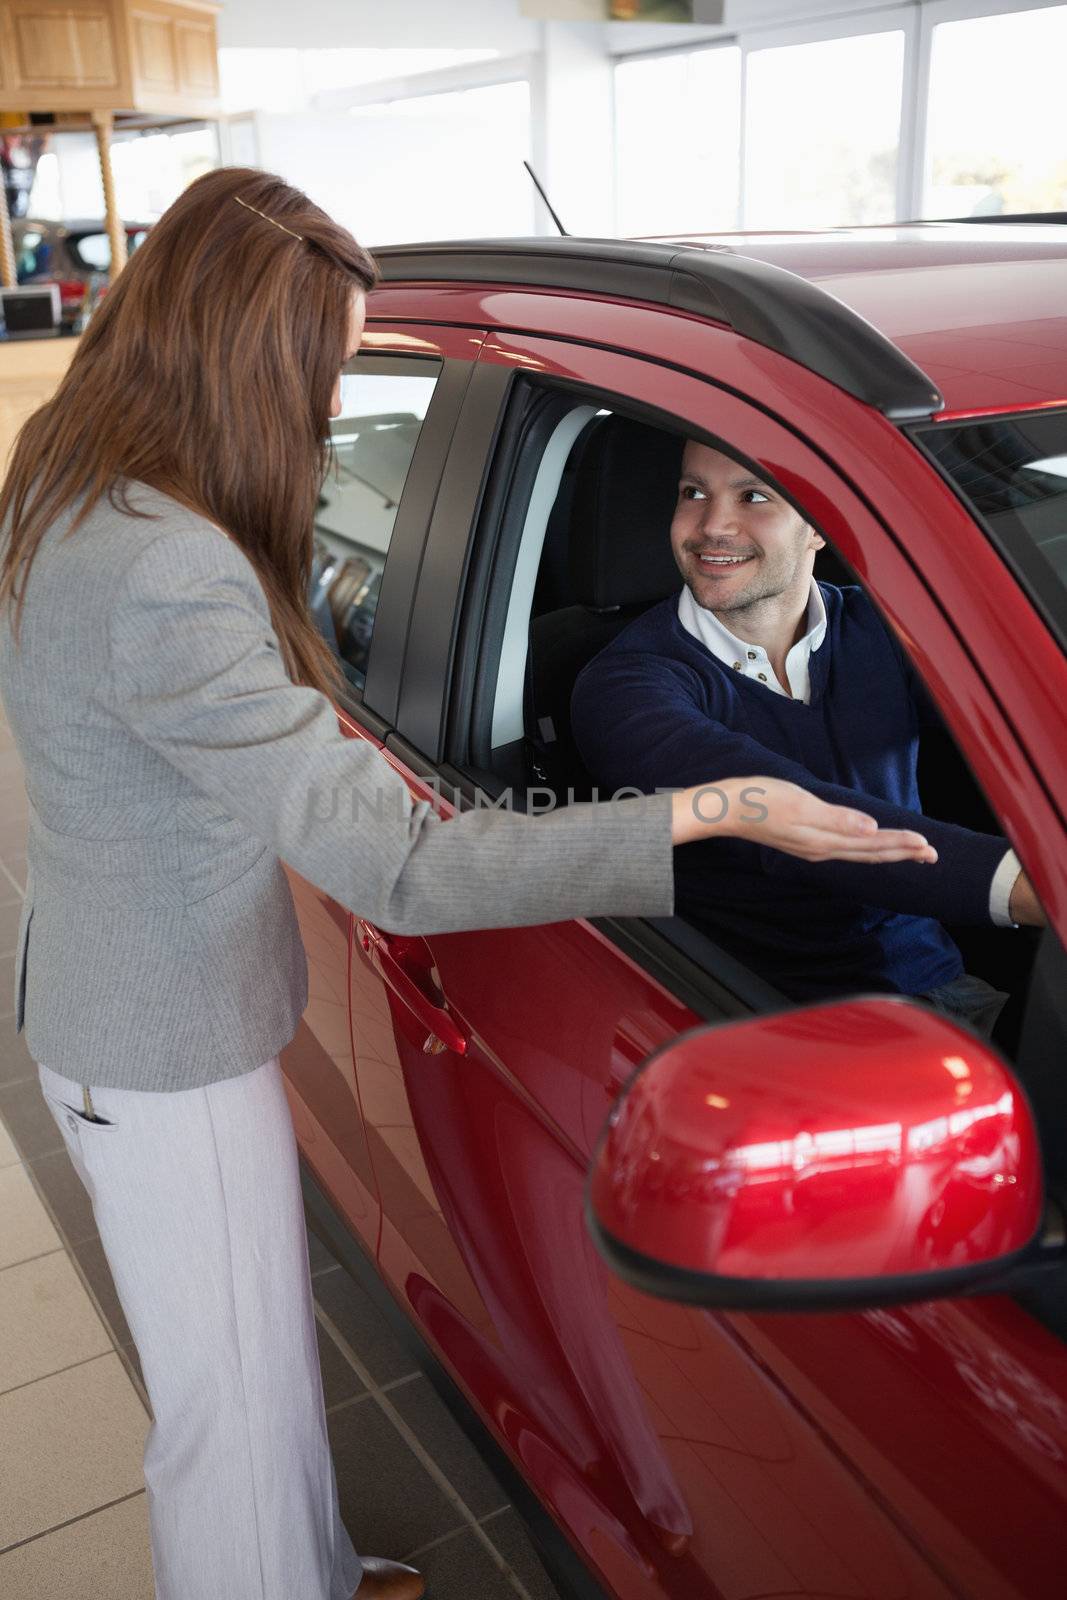 Businesswoman presenting the car to a client in a dealership